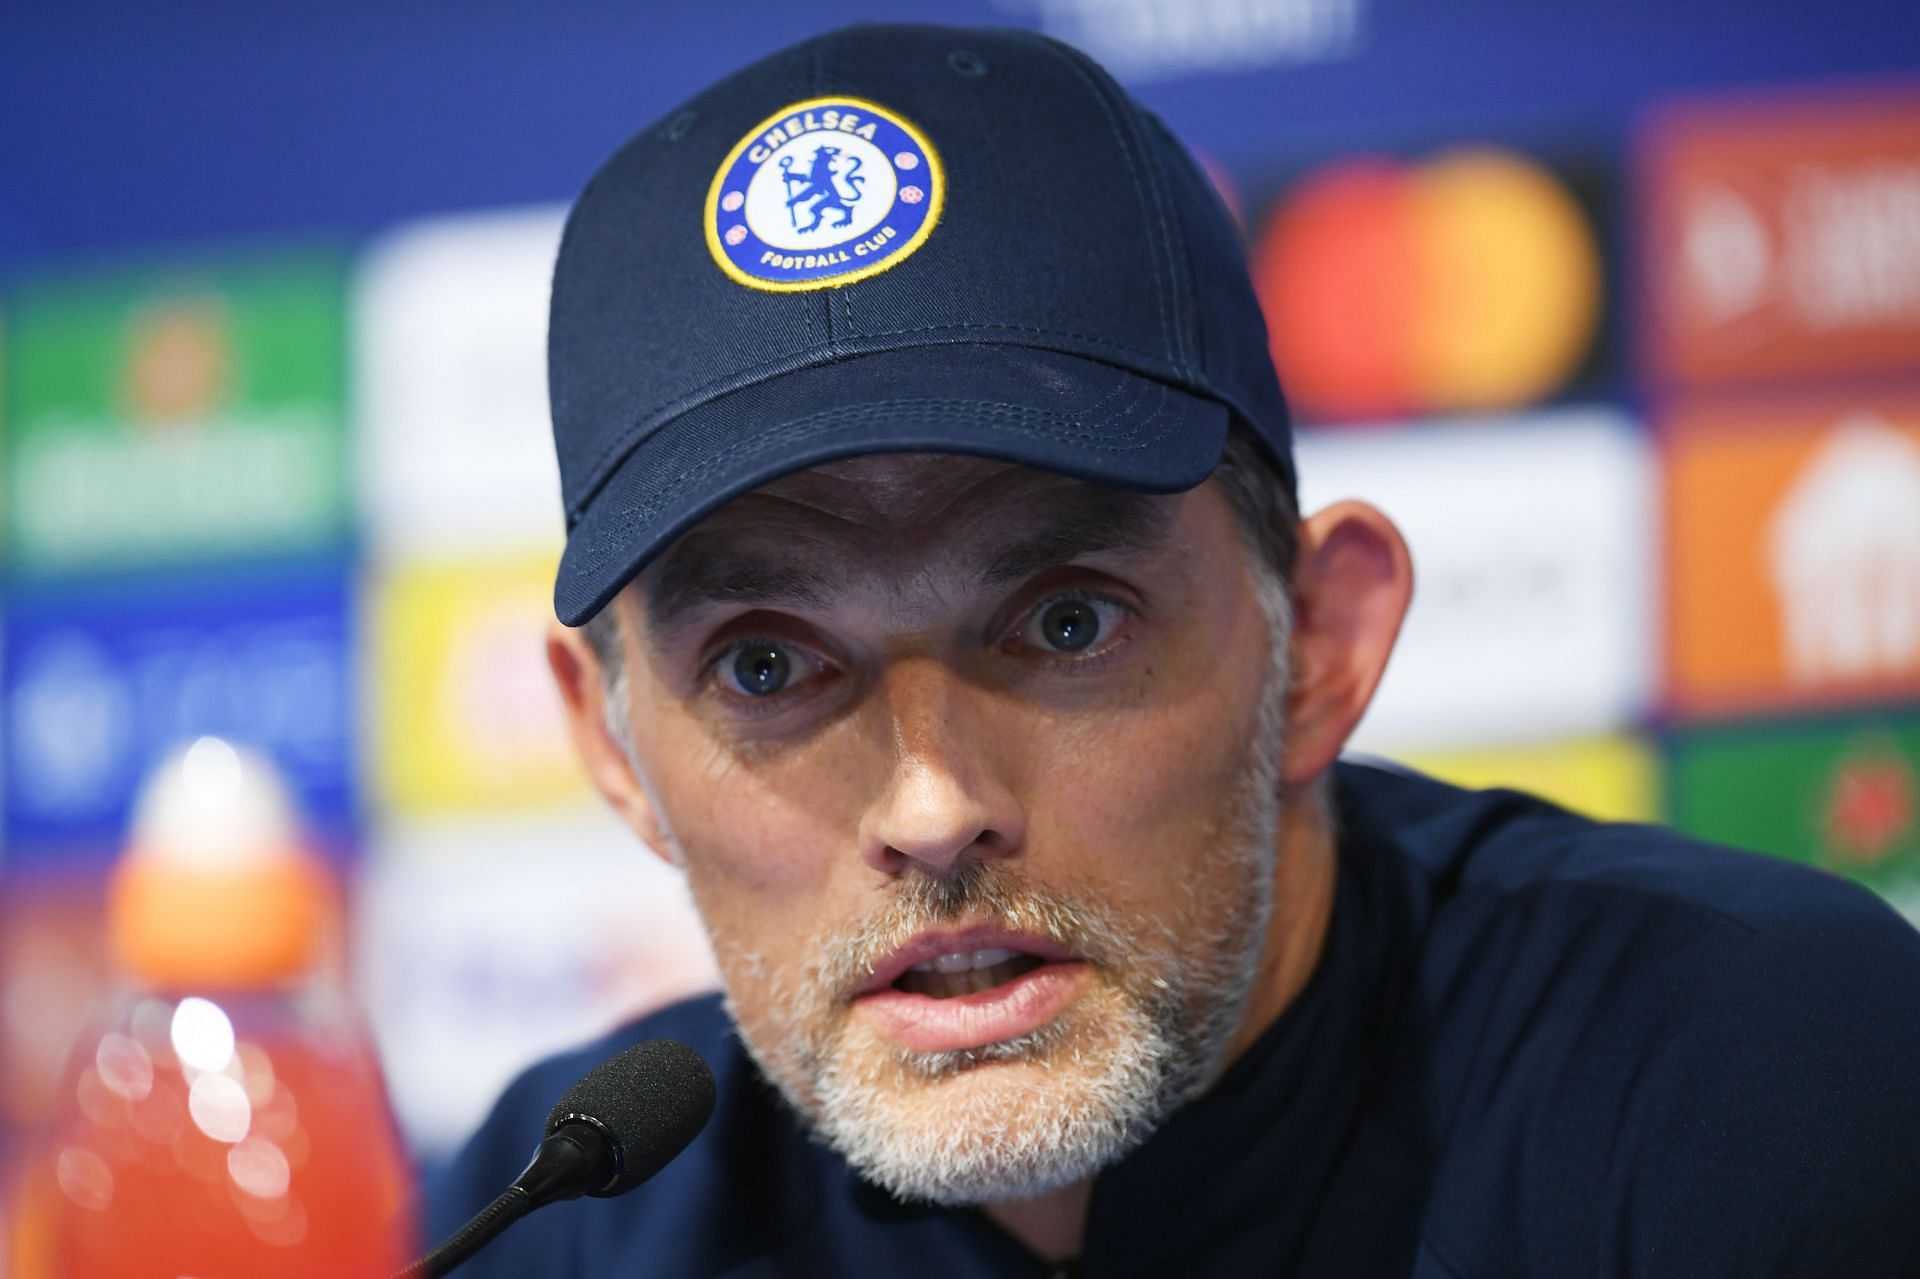 Thomas Tuchel parting ways with Chelsea has been one of the most unexpected moments of the season so far.